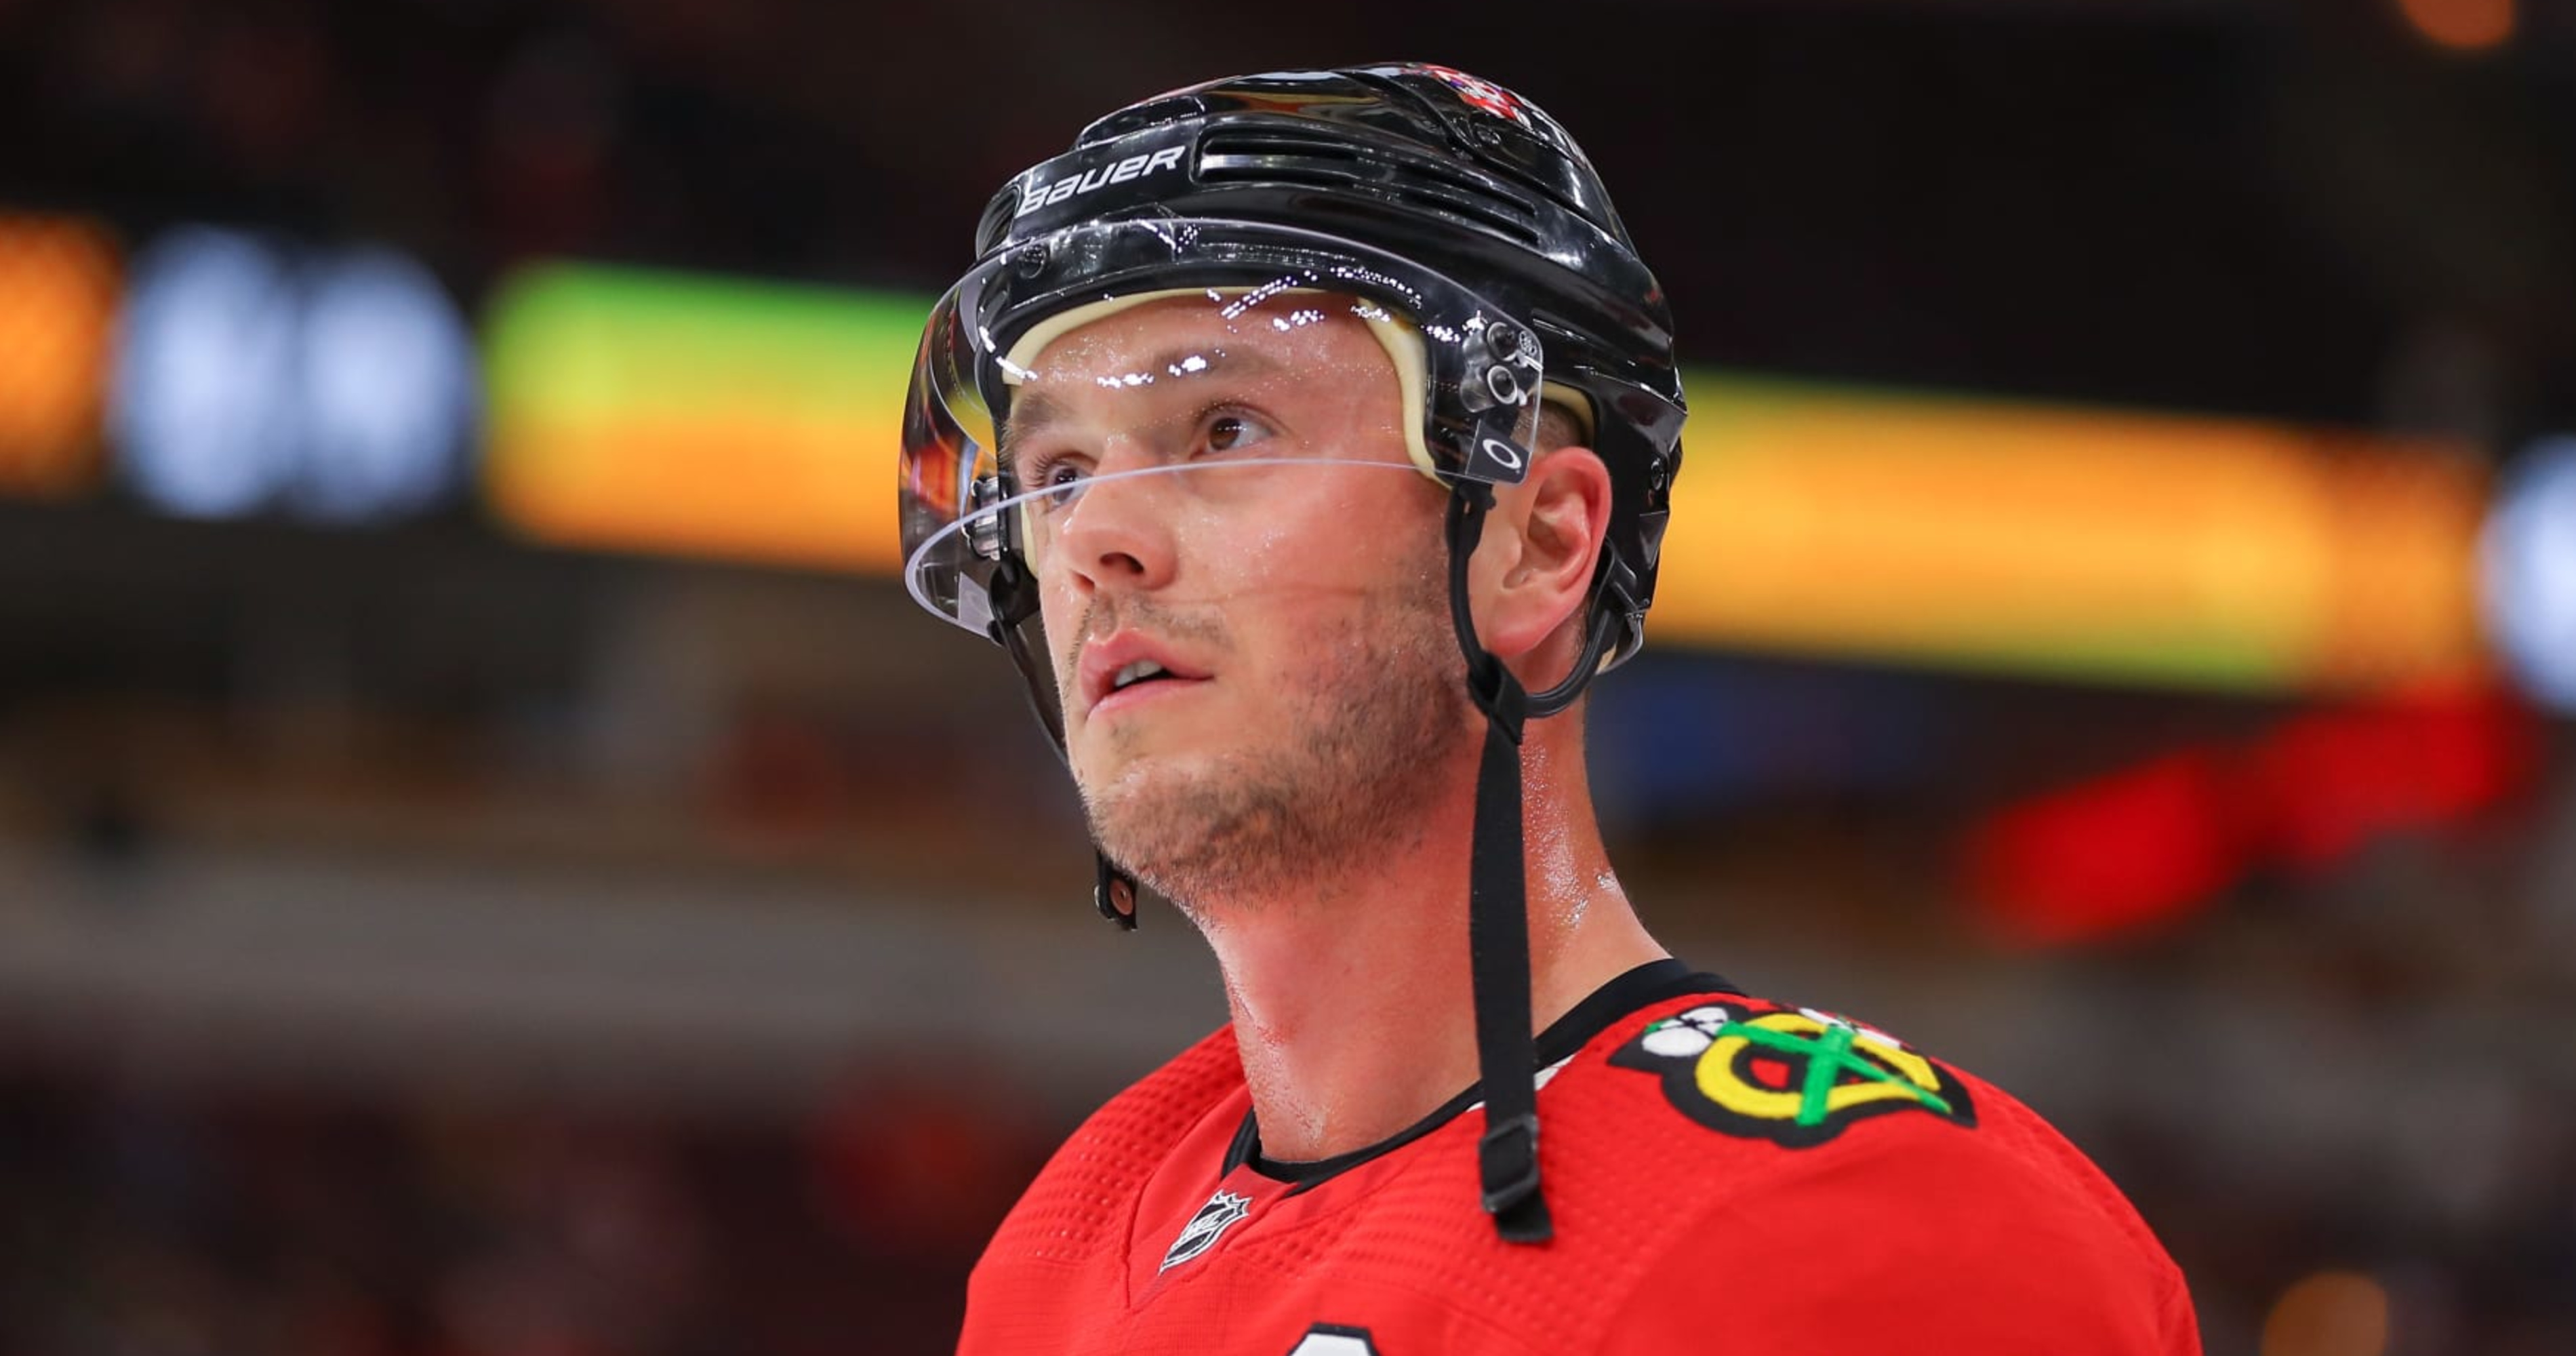 Jonathan Toews announces he is 'taking time away' from hockey